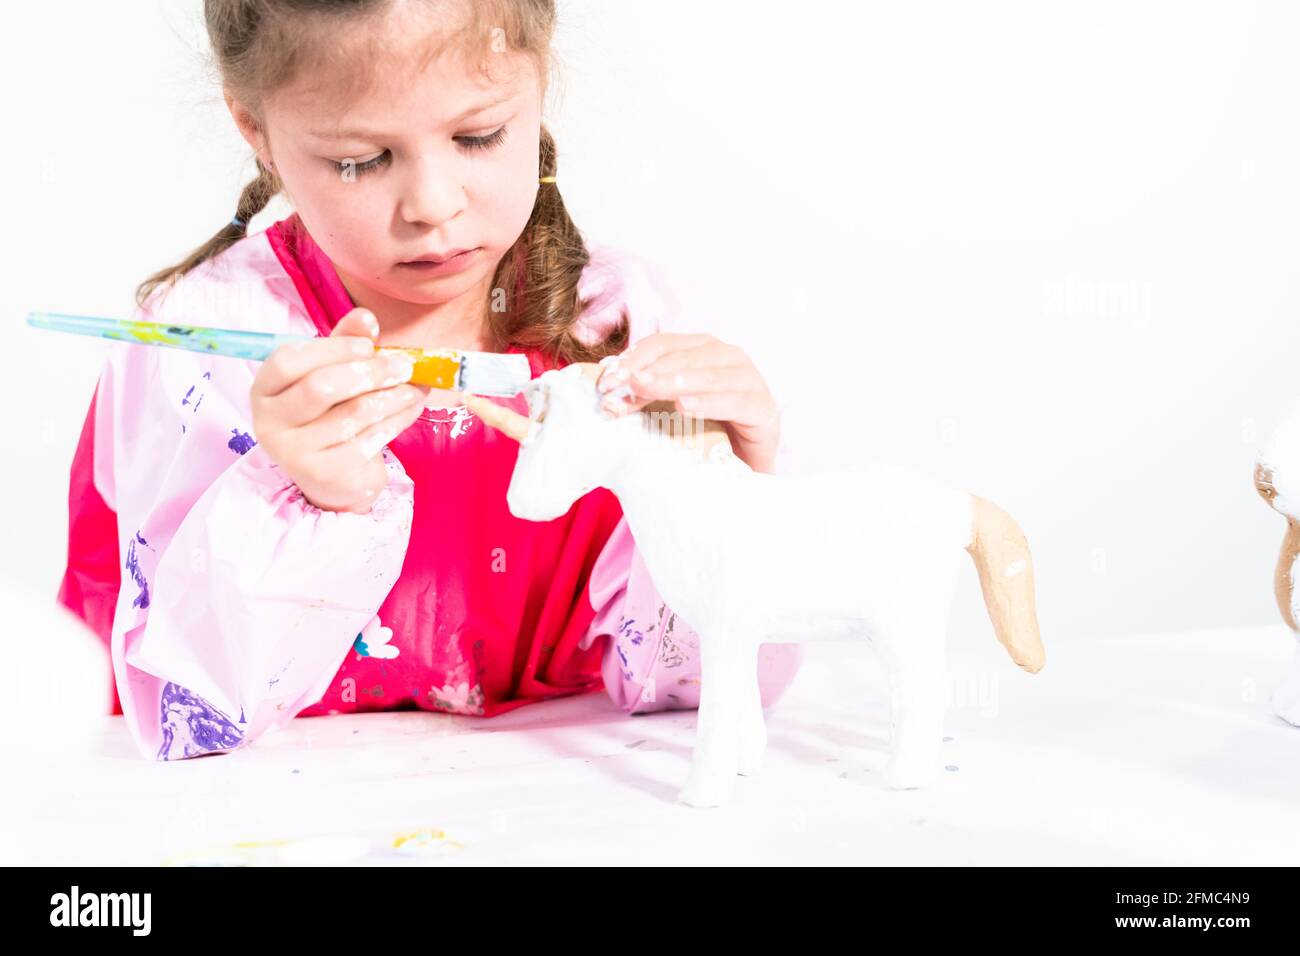 Little girl working on her art project for distance learning at home during COVID-19 pendemic. Stock Photo